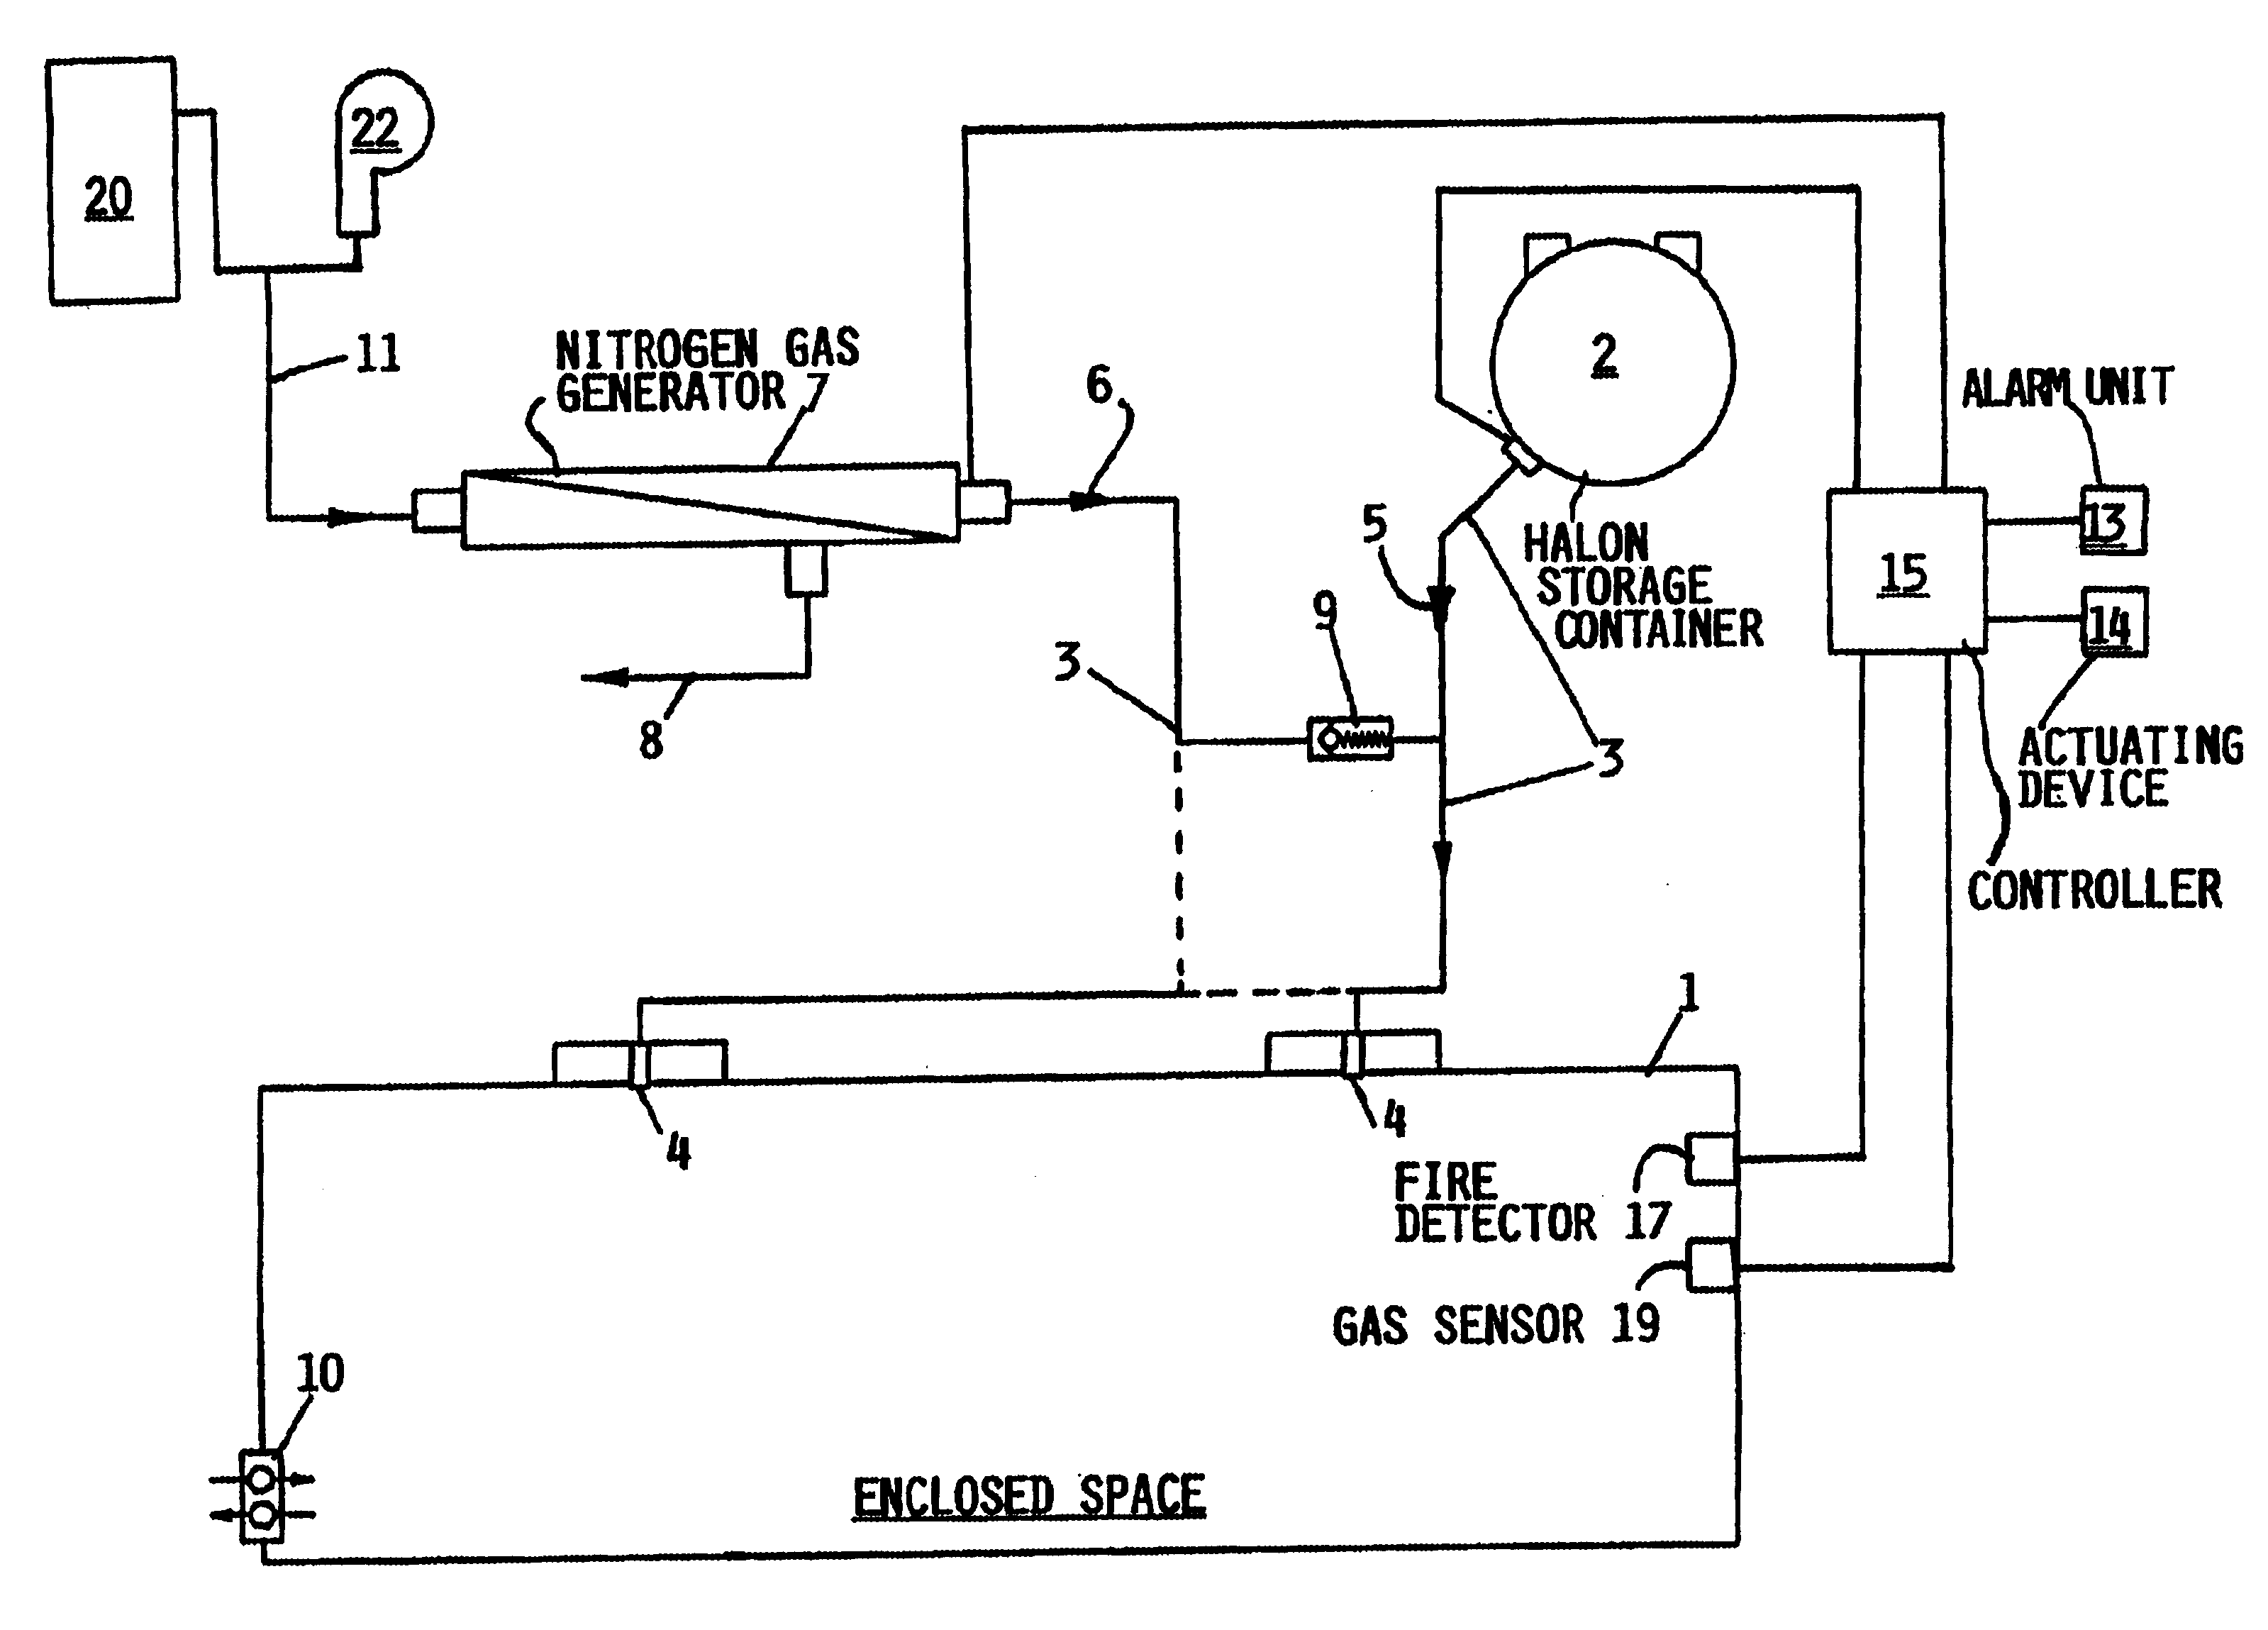 System for extinguishing and suppressing fire in an enclosed space in an aircraft